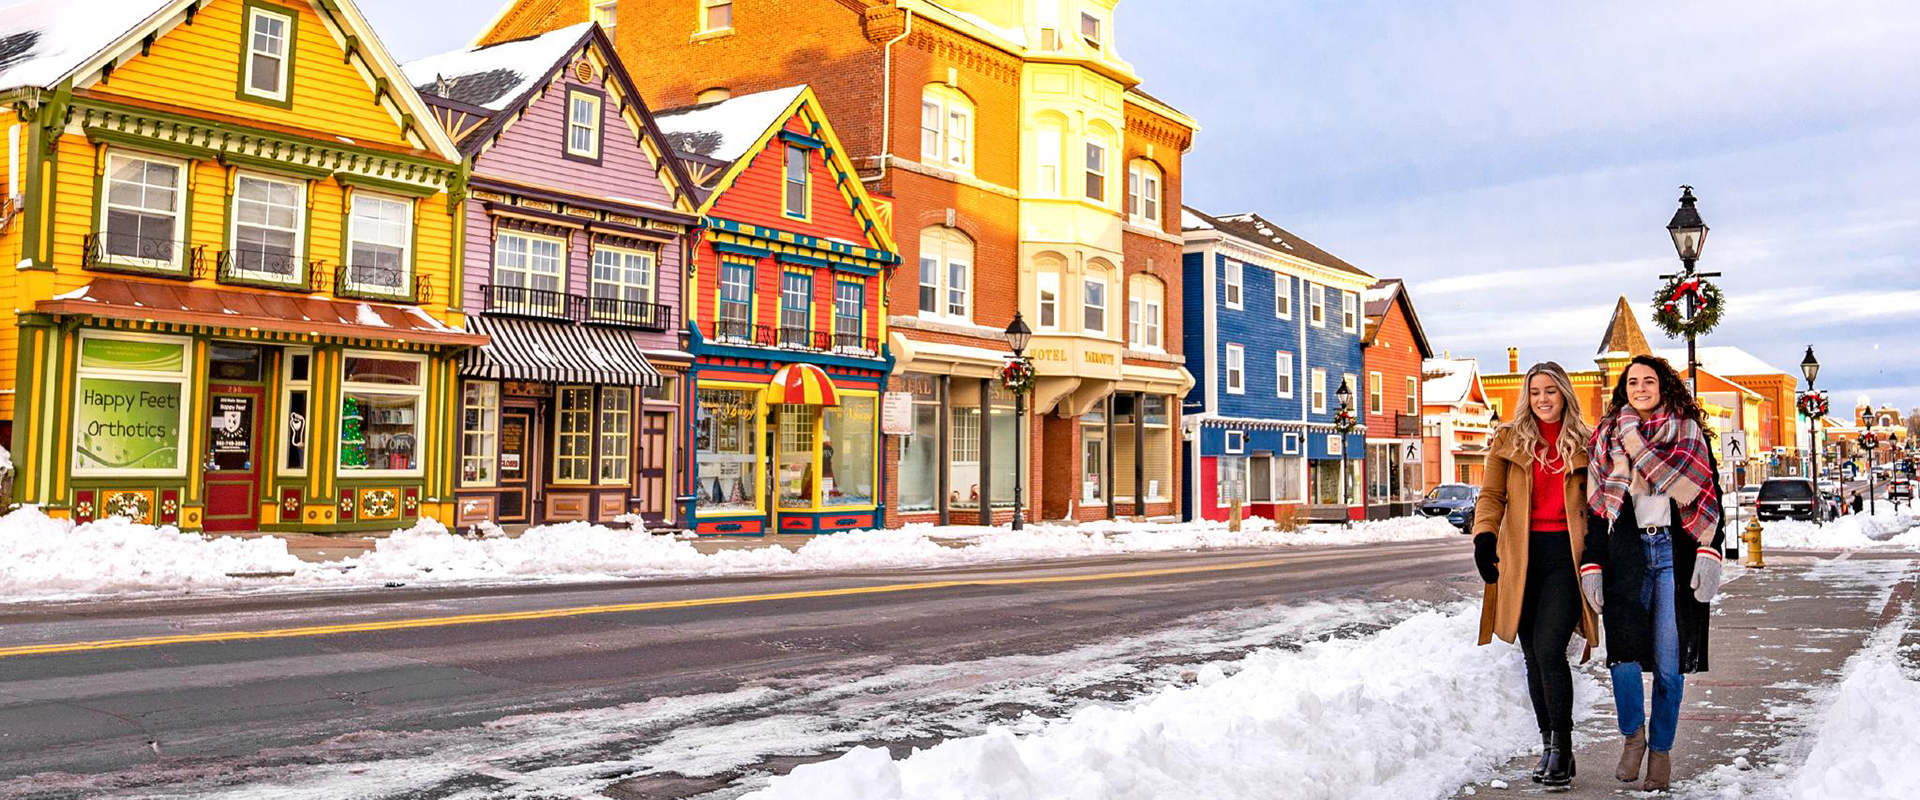 Two women walking along a snow lined street in downtown Yarmouth with colourful storefronts in the background.